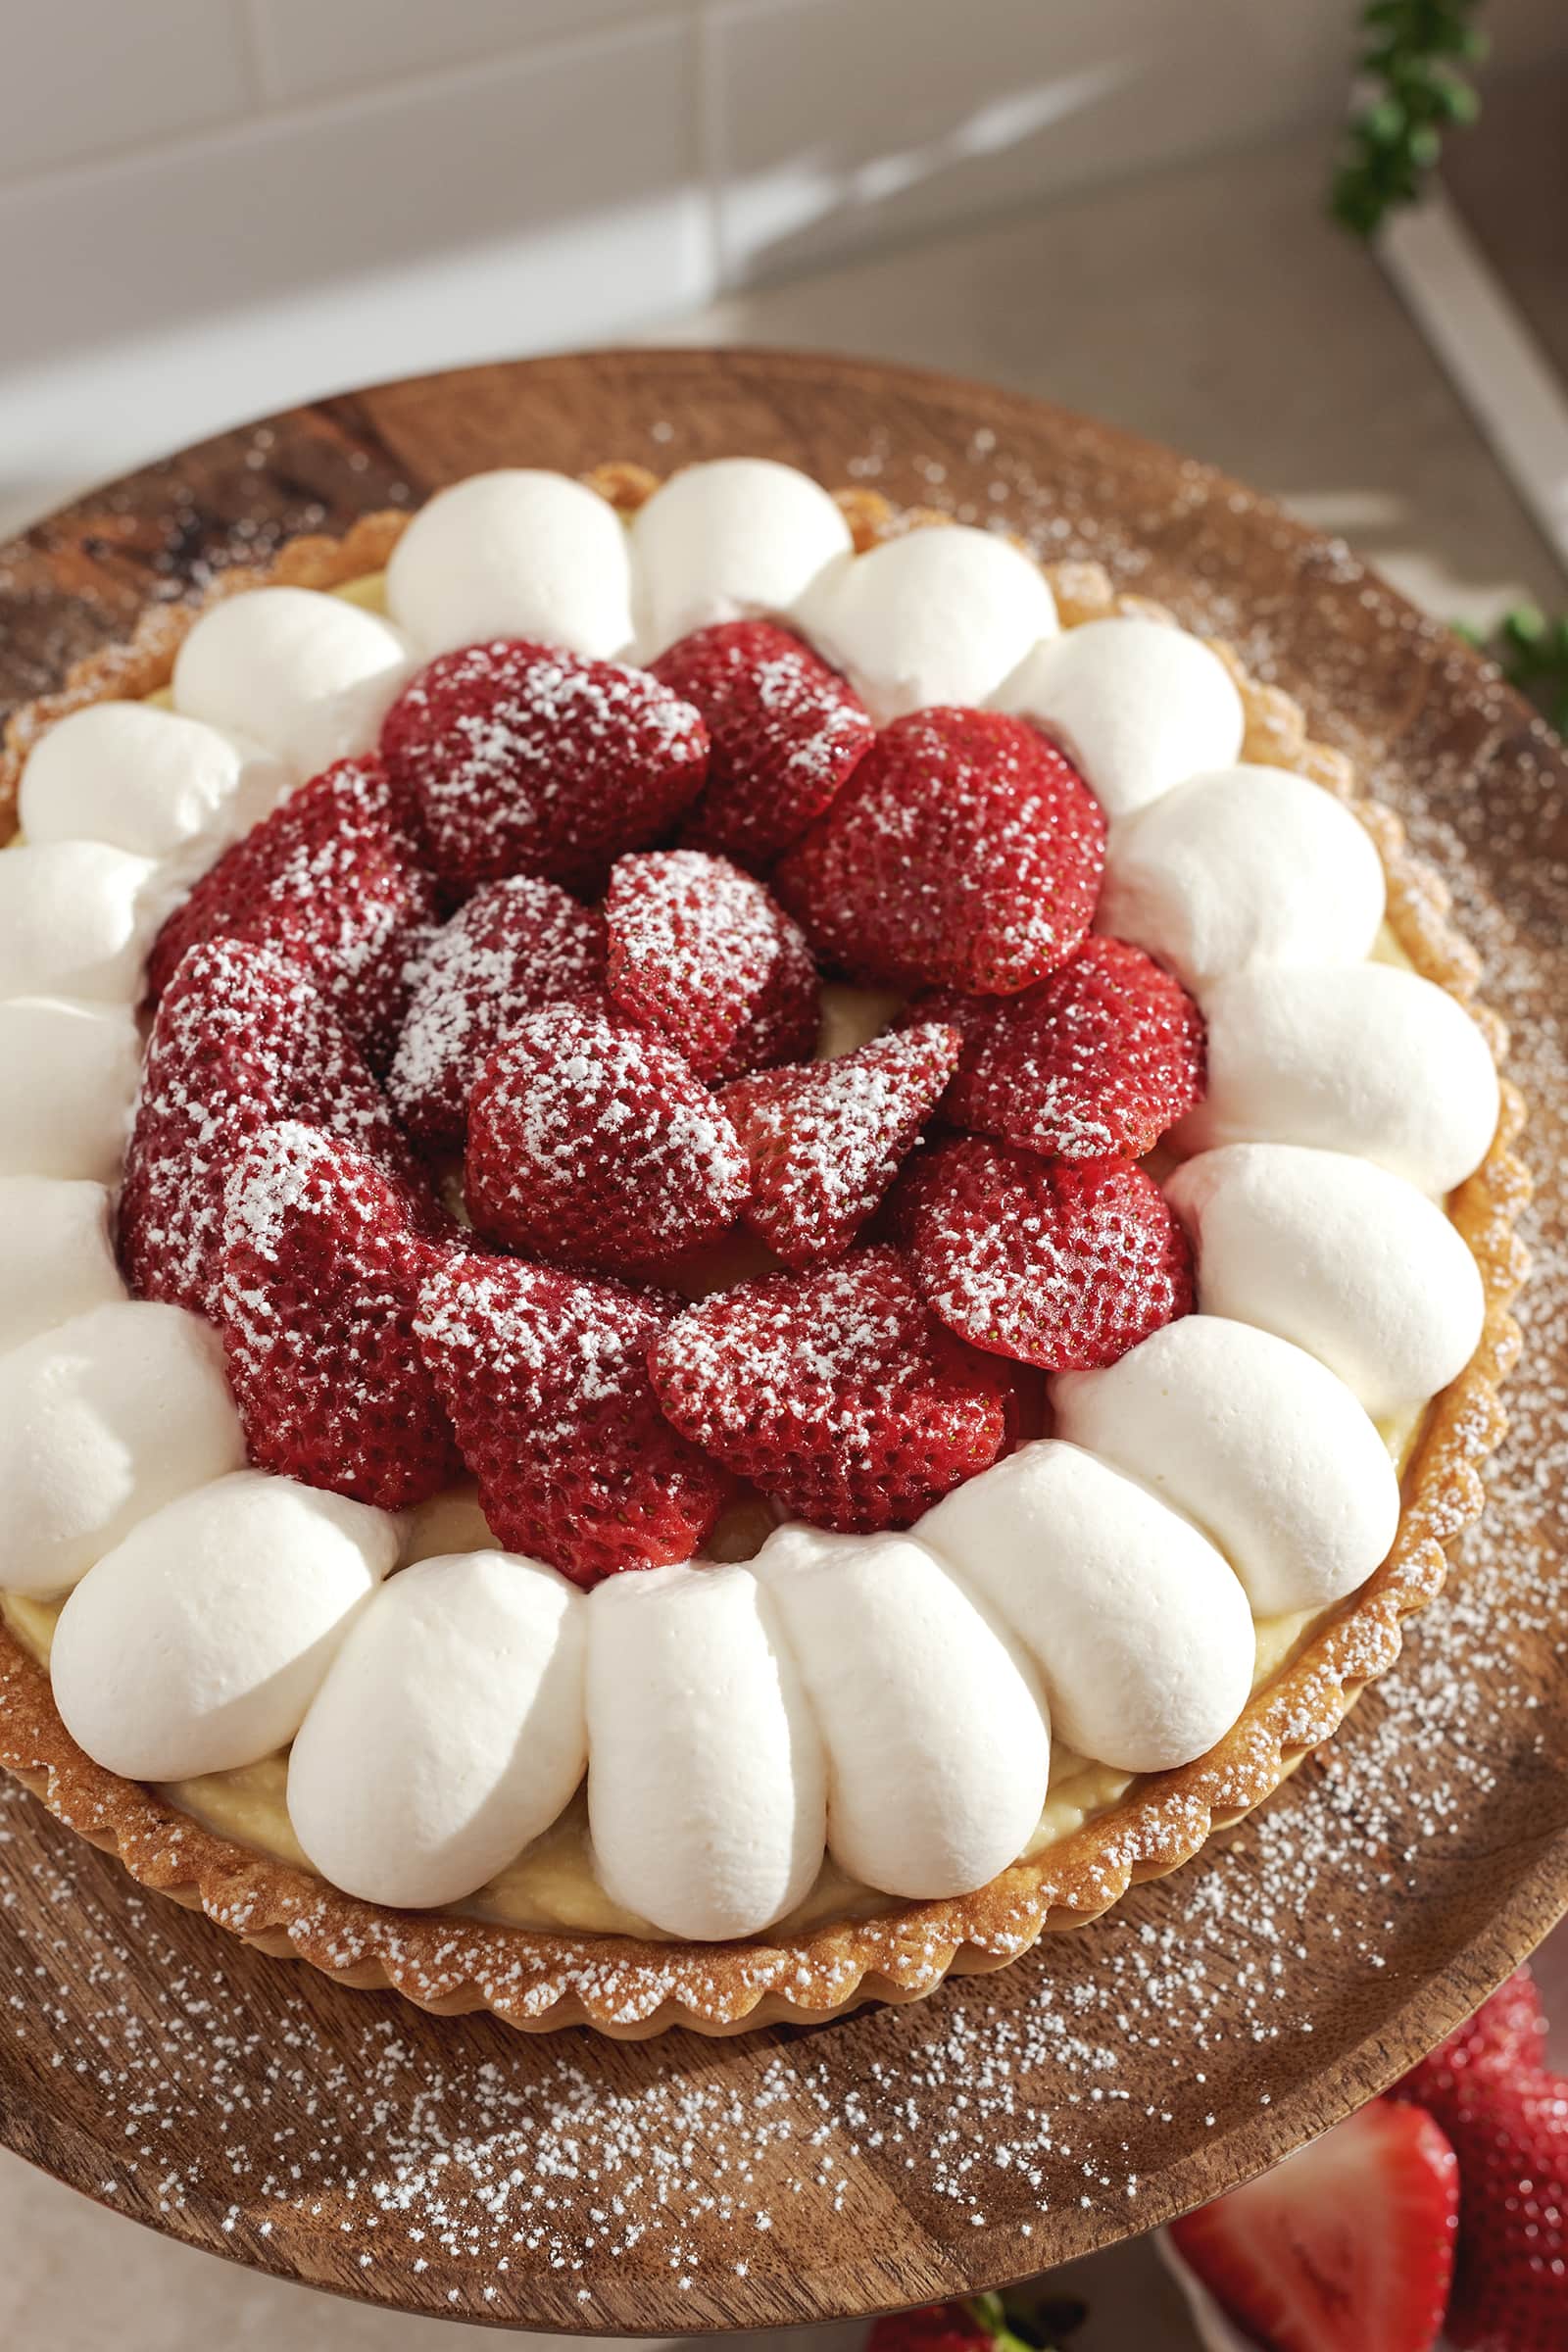 Top down view of a tart topped with whipped cream and strawberries and dusted with powdered sugar on a wooden plate.